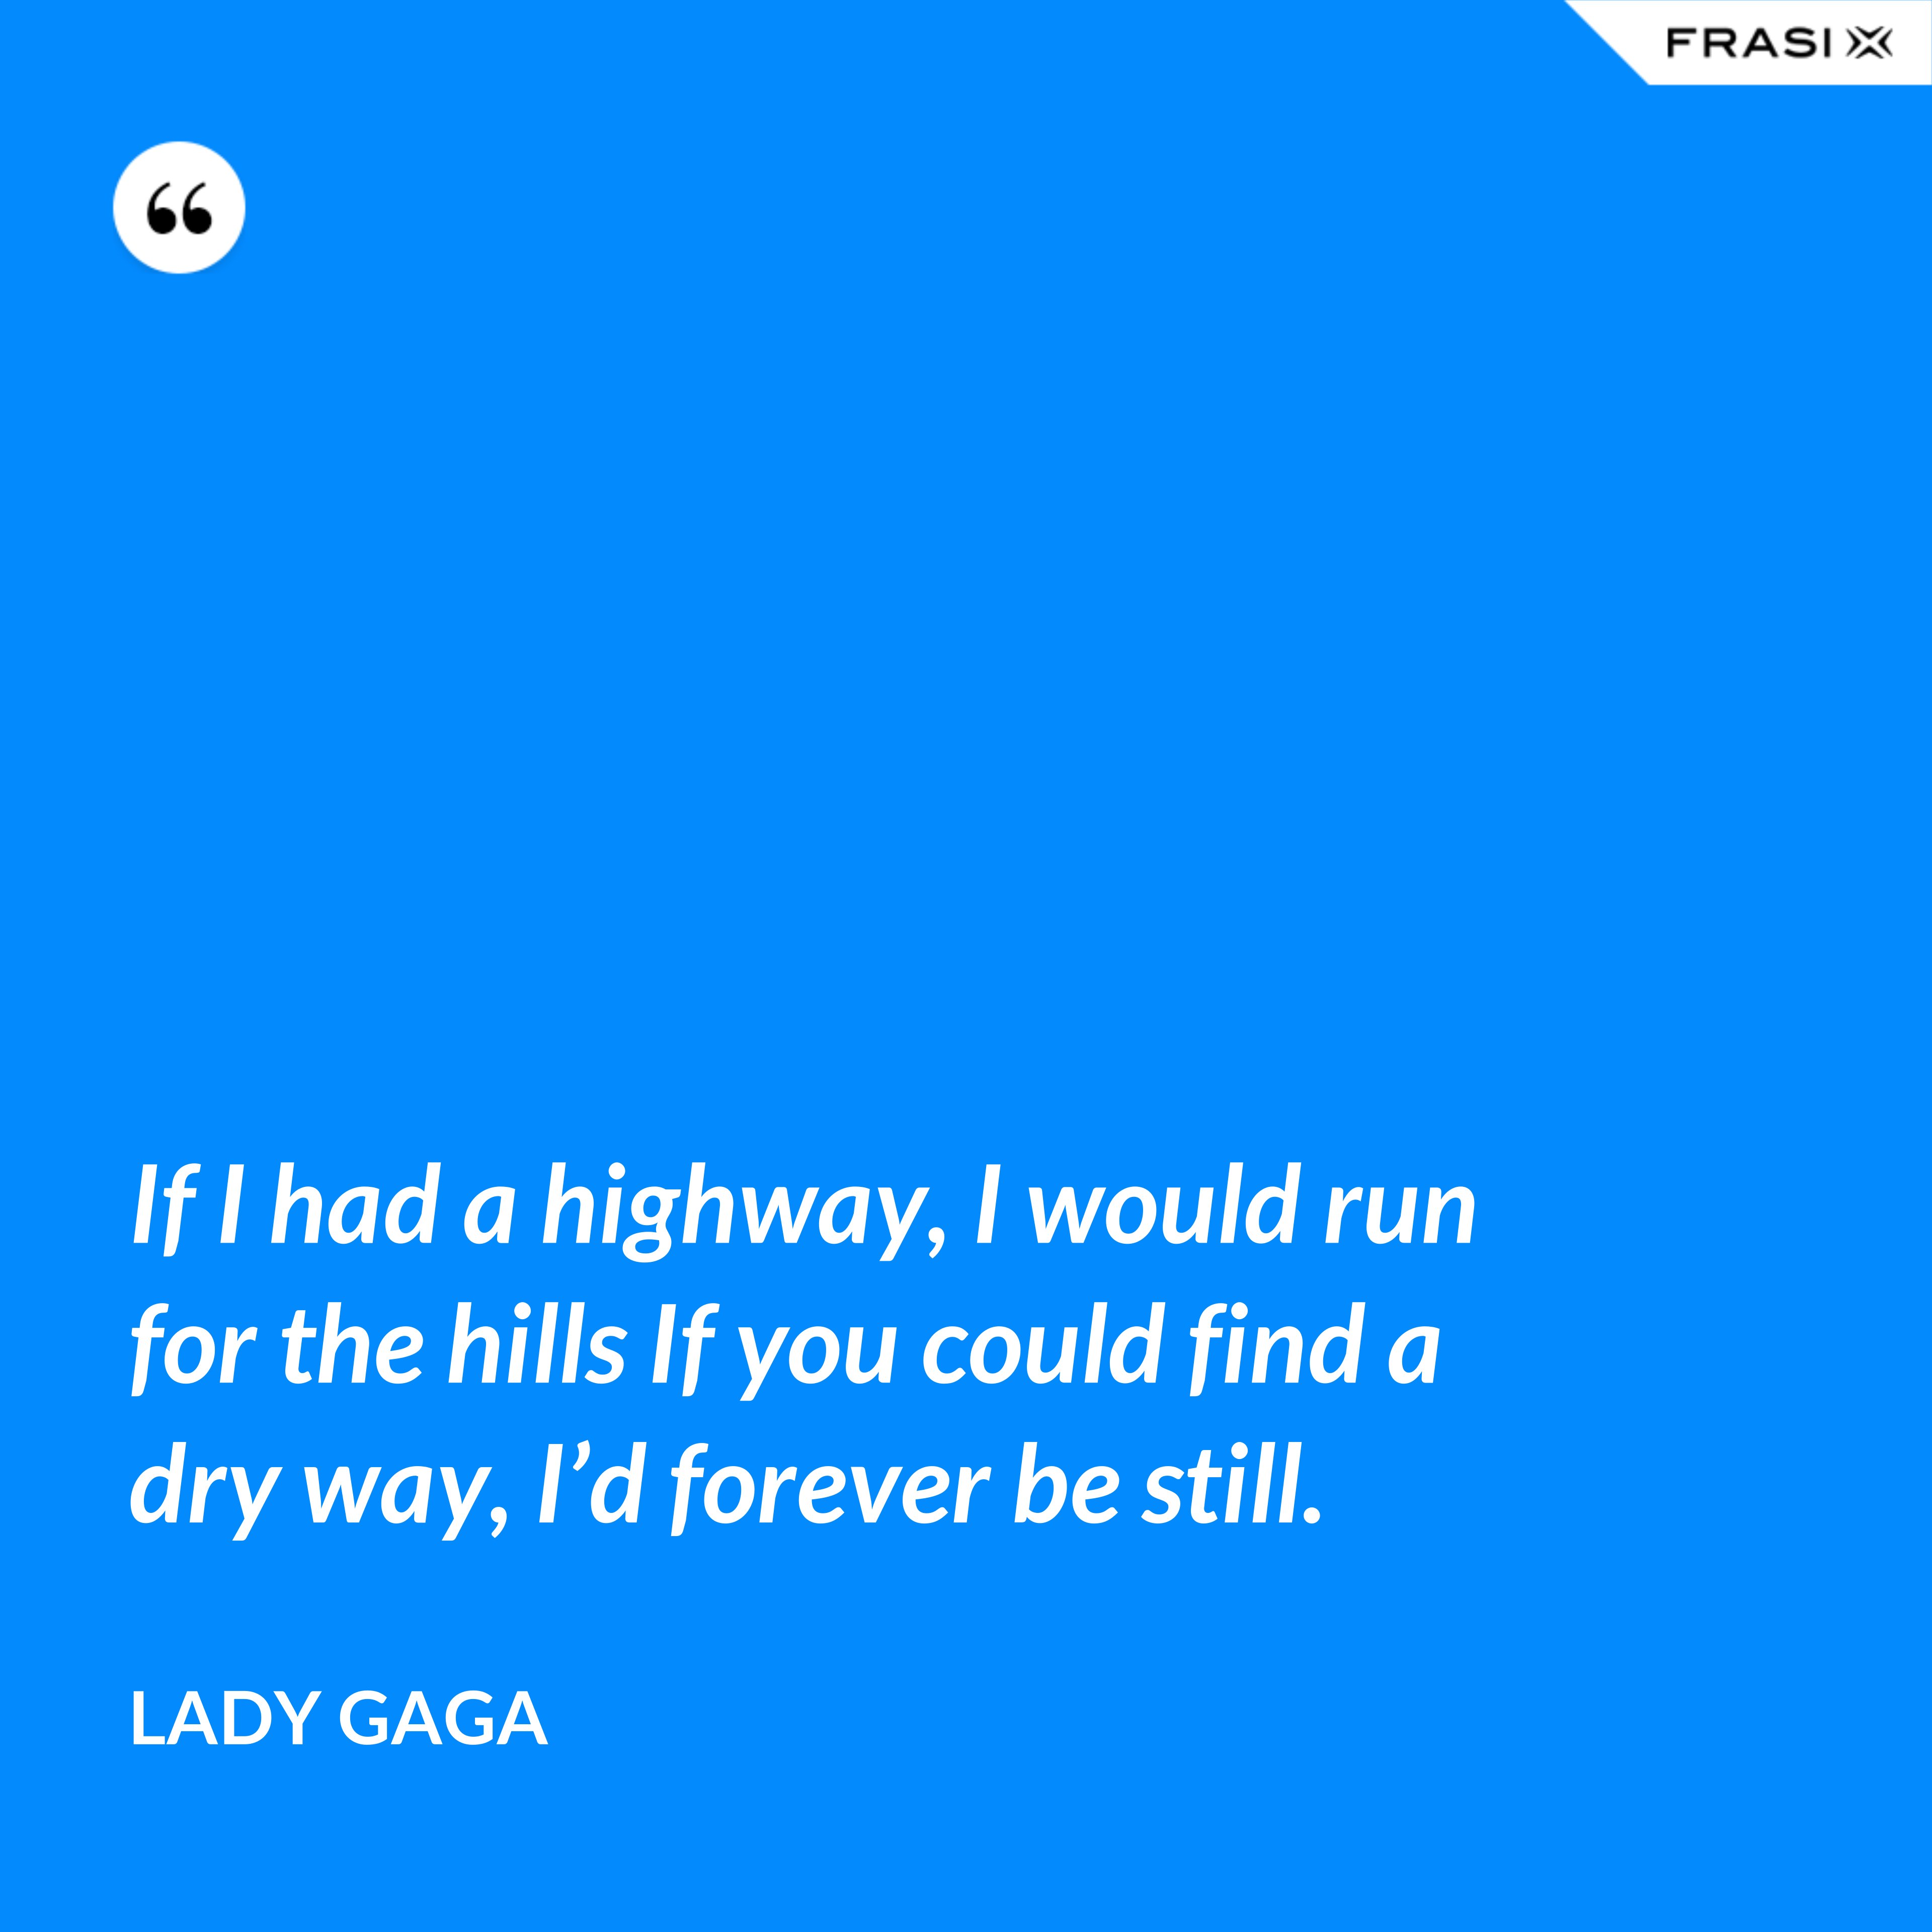 If I had a highway, I would run for the hills If you could find a dry way, I’d forever be still. - Lady Gaga